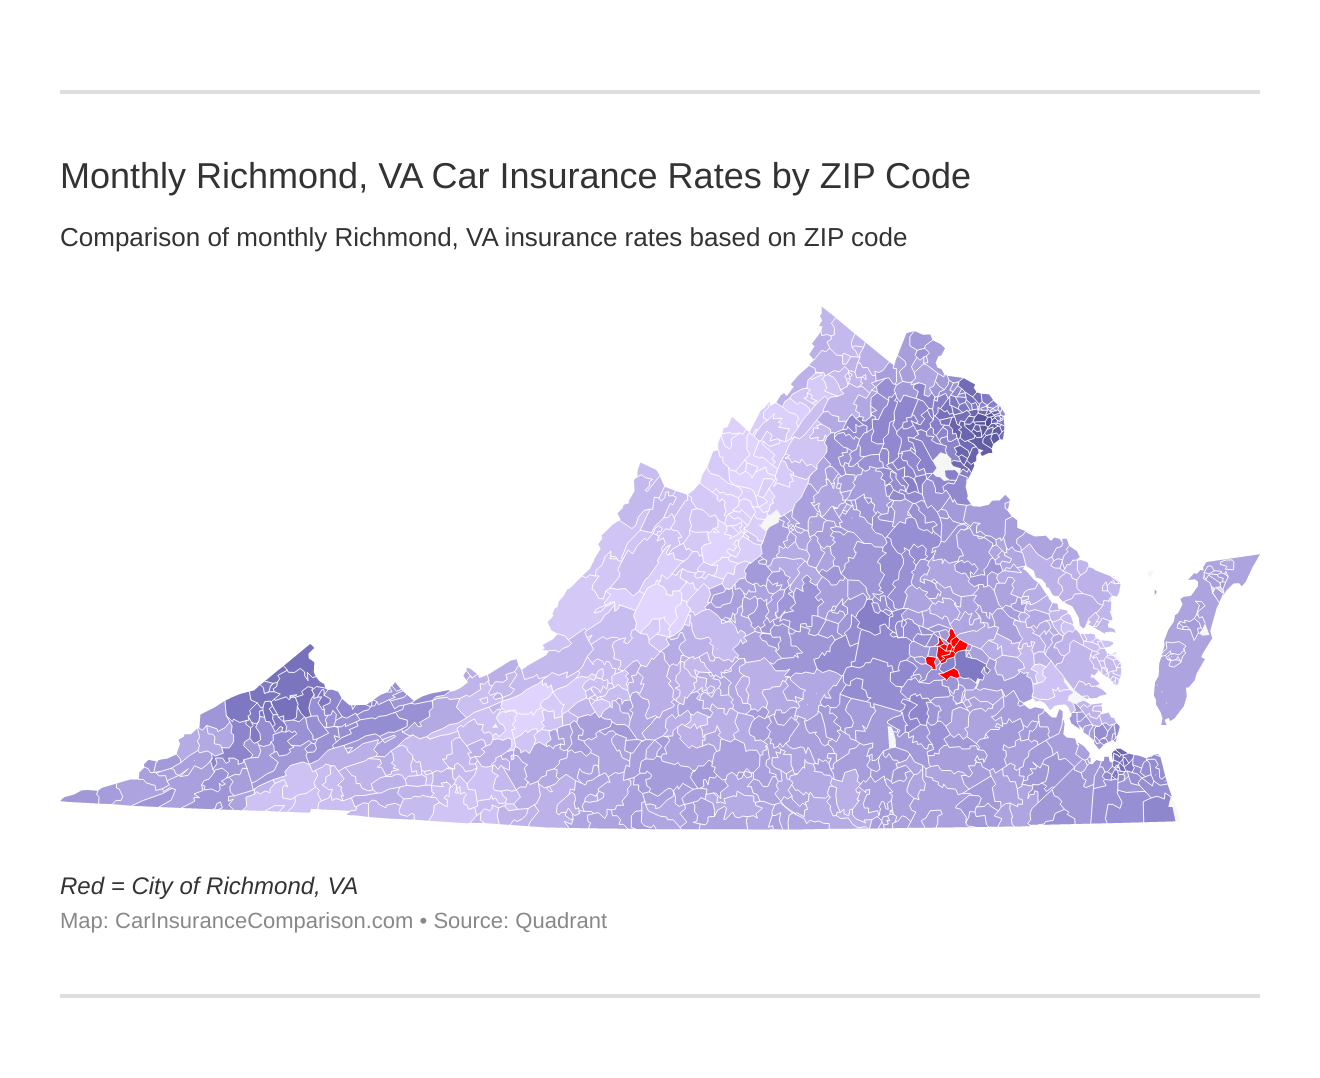 Monthly Richmond, VA Car Insurance Rates by ZIP Code